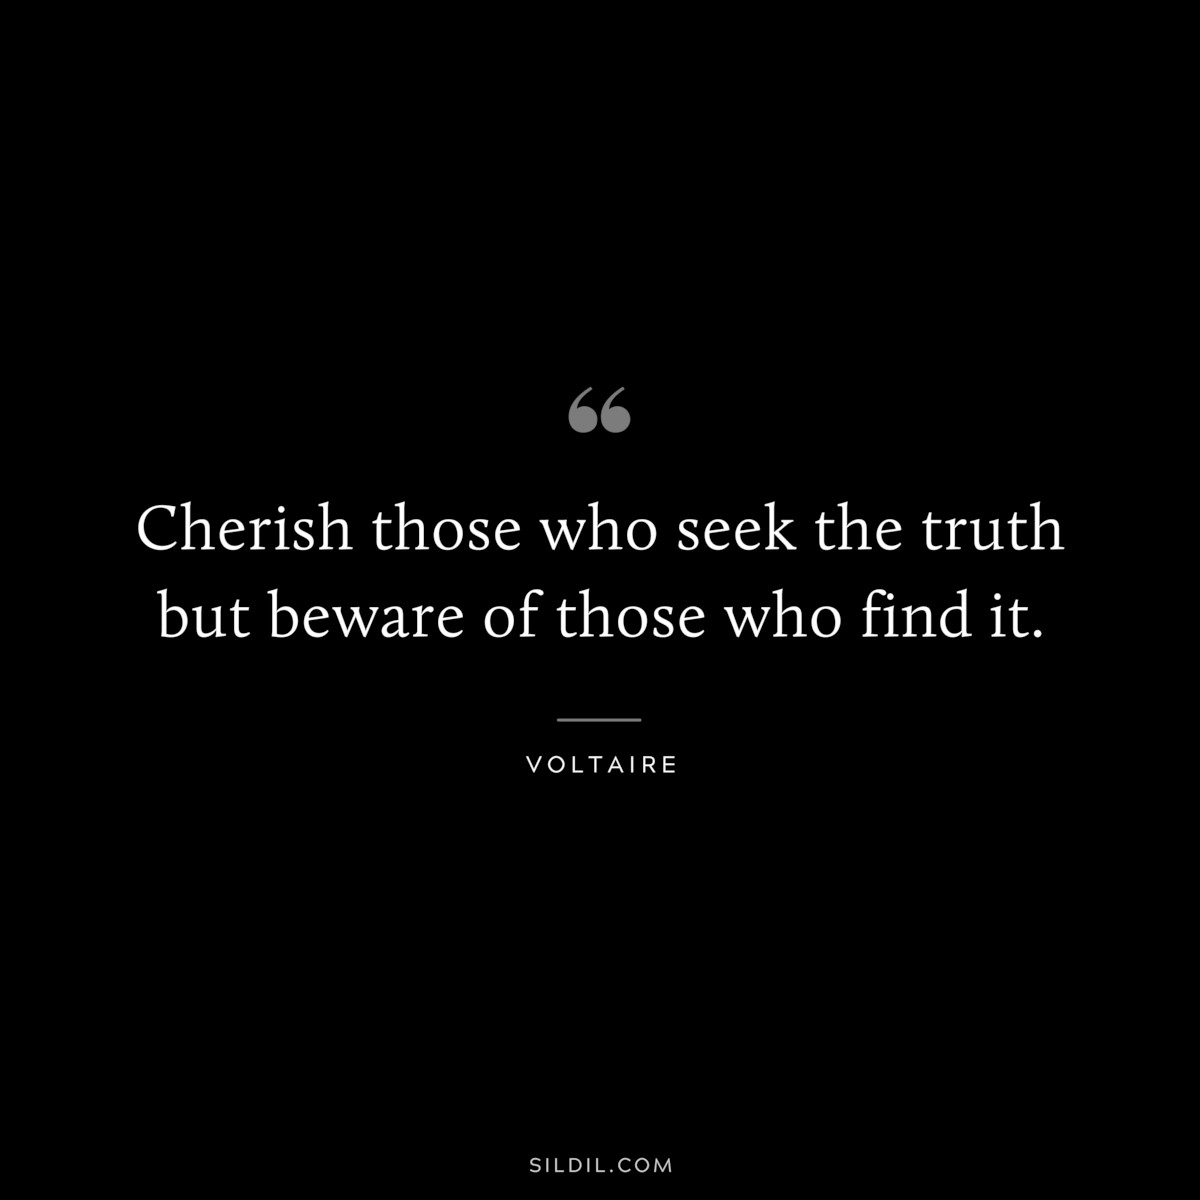 Cherish those who seek the truth but beware of those who find it. ― Voltaire